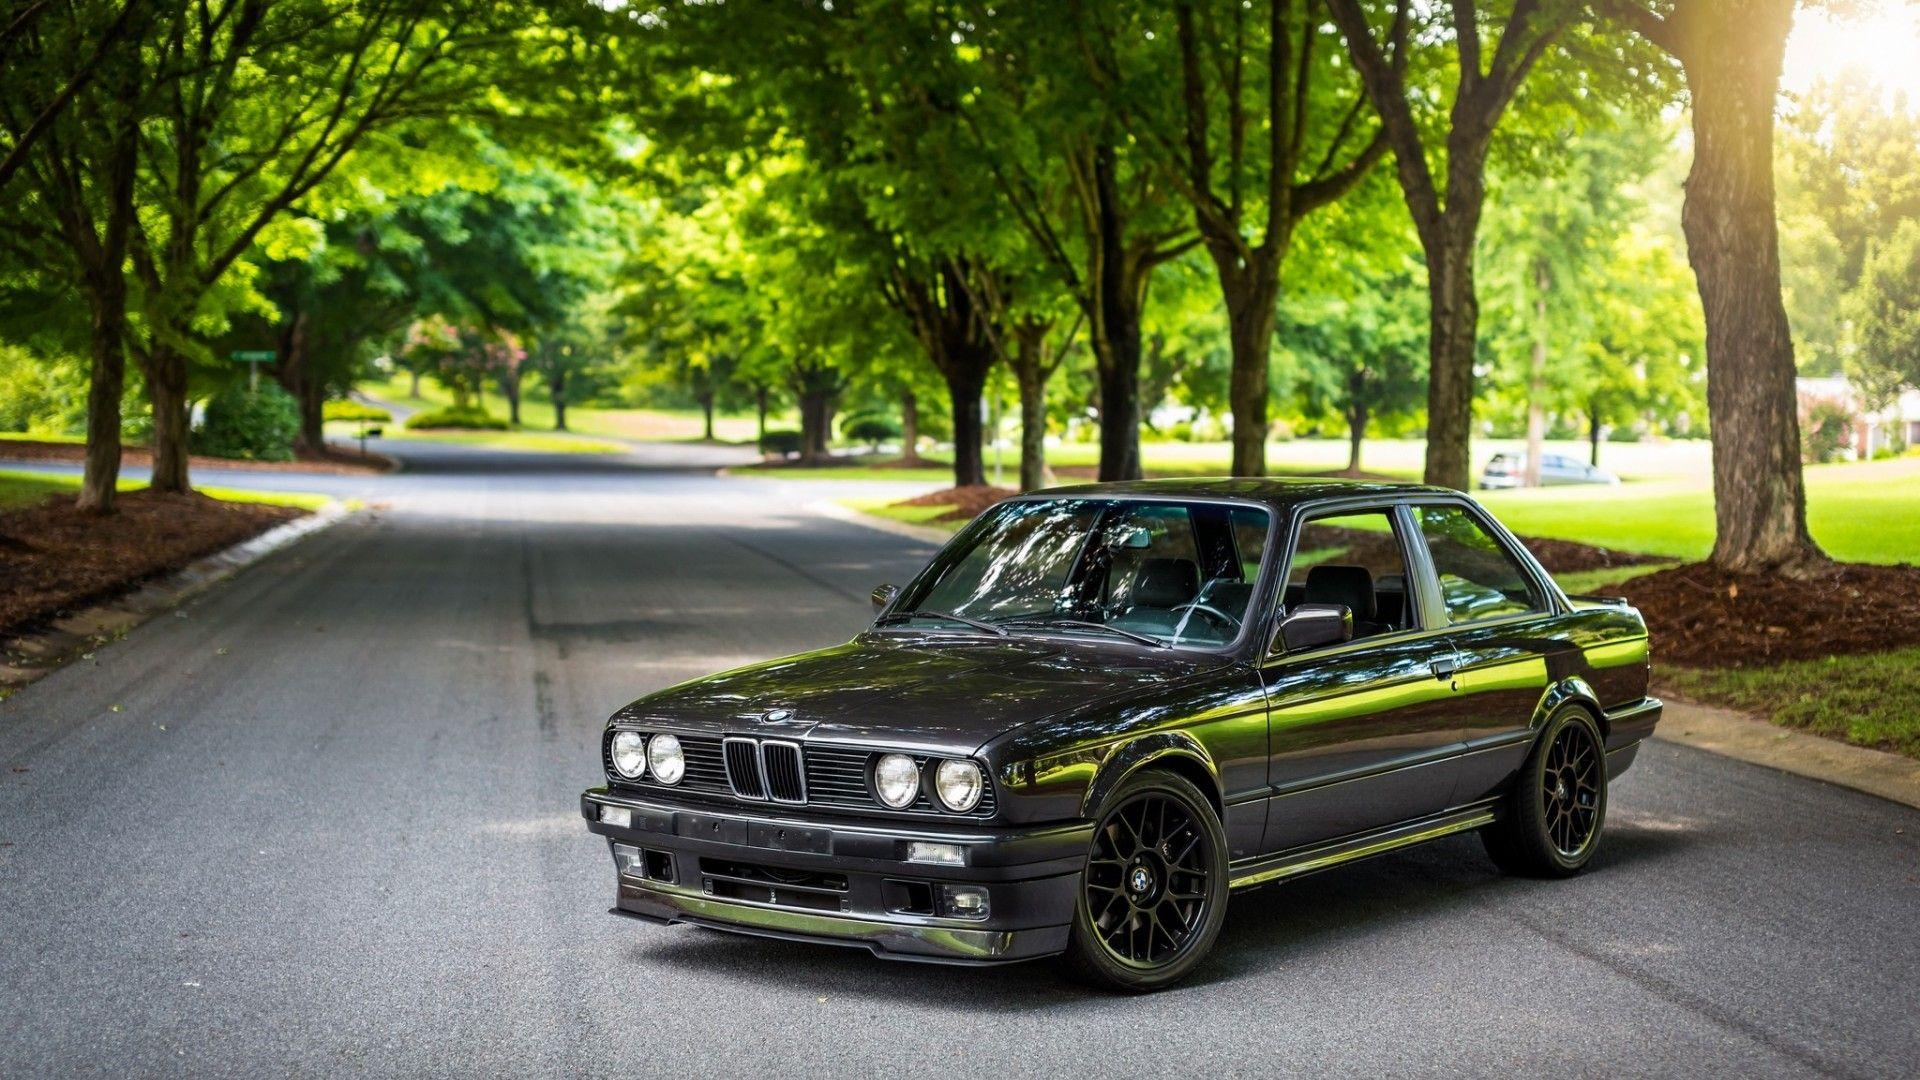 Best E30 Car Wallpaper, Photo and Videos